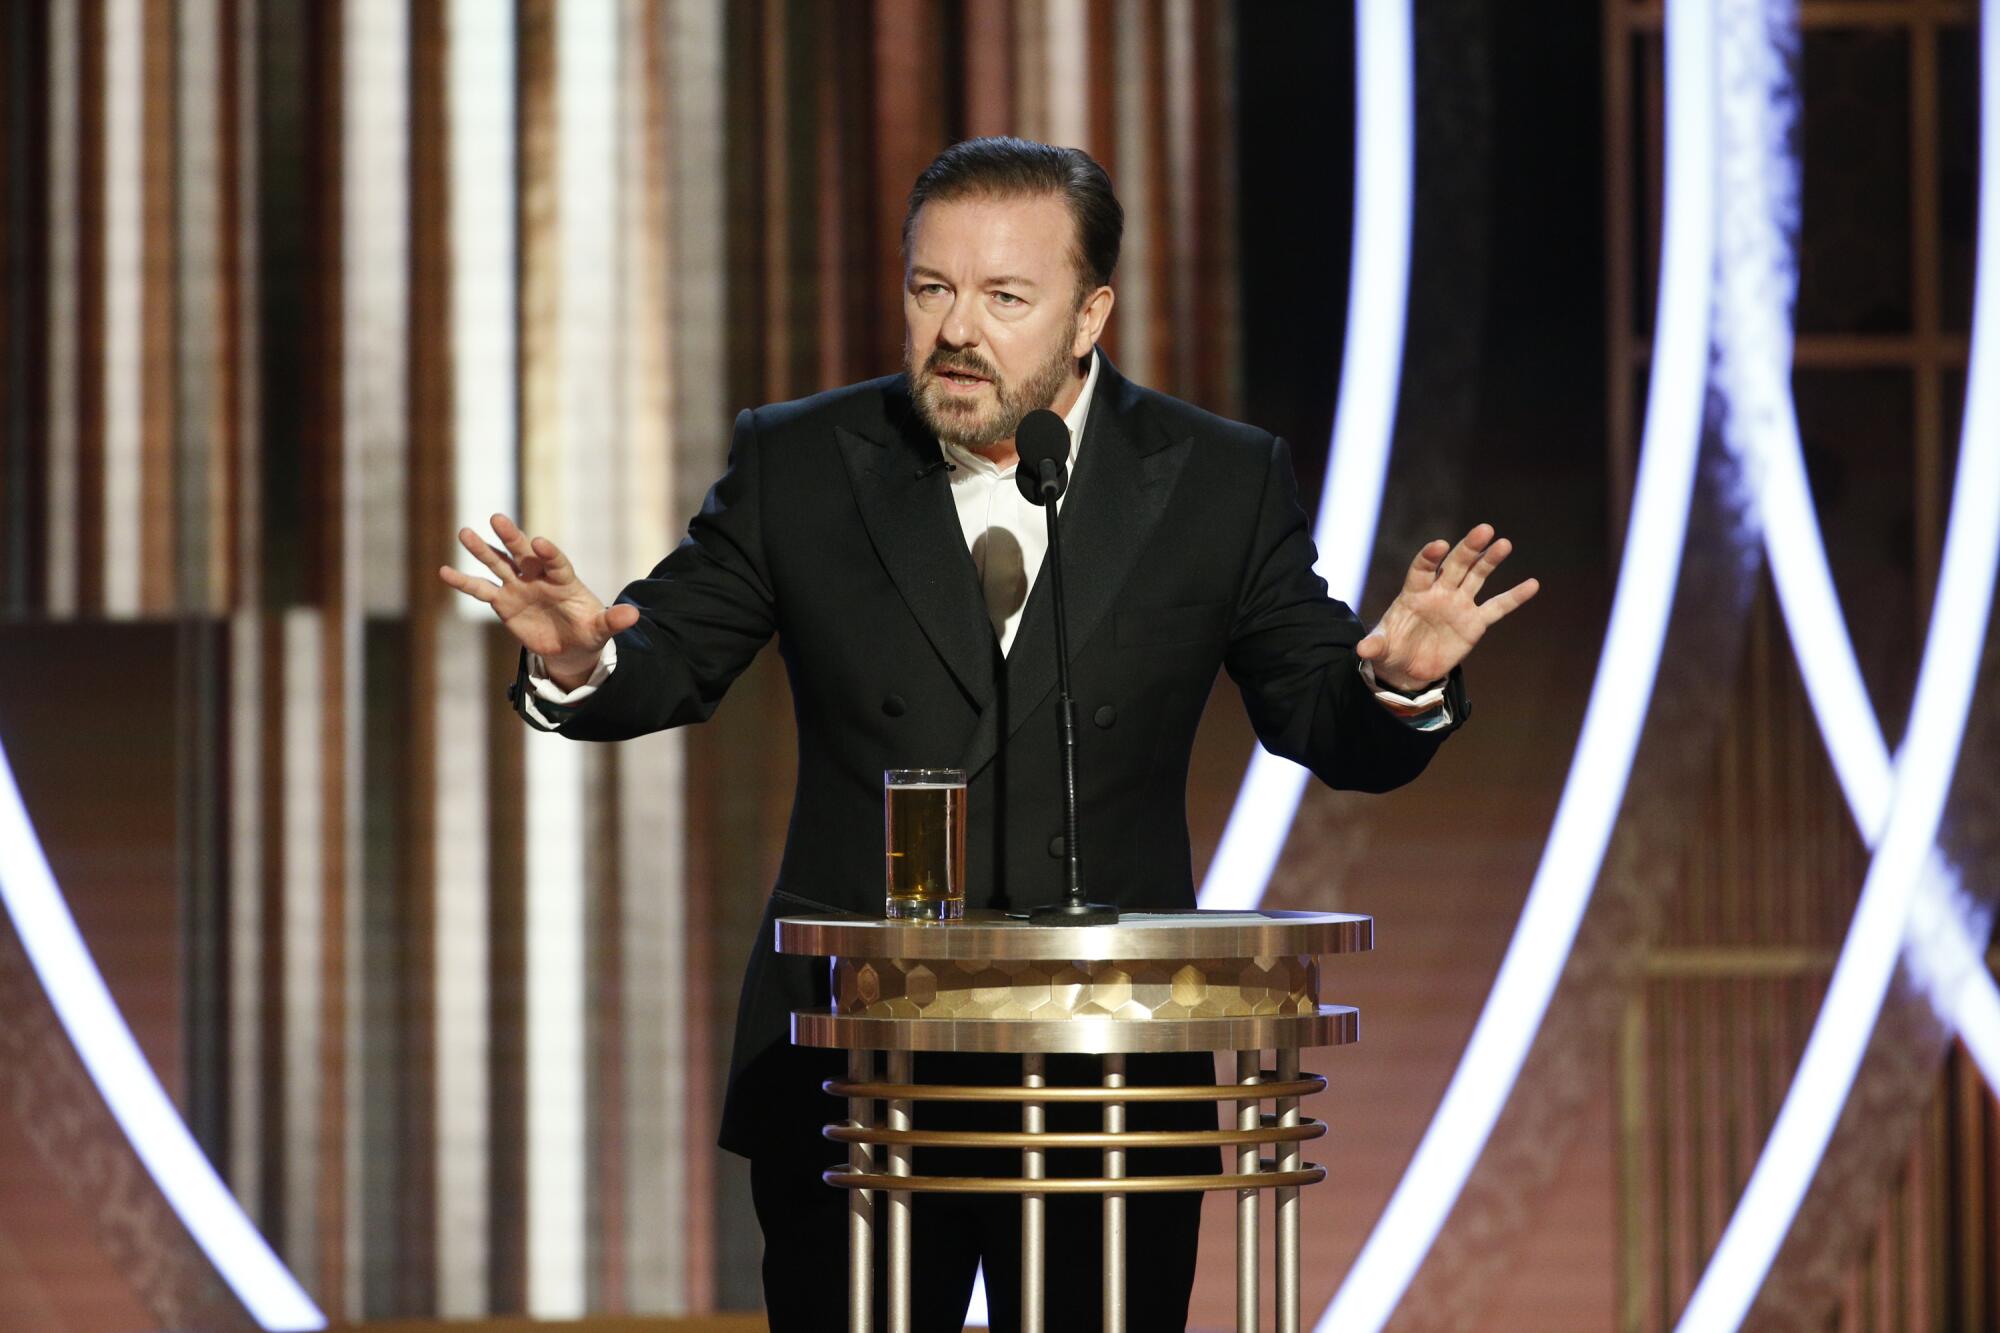 Host Ricky Gervais stands on stage at the Golden Globe Awards